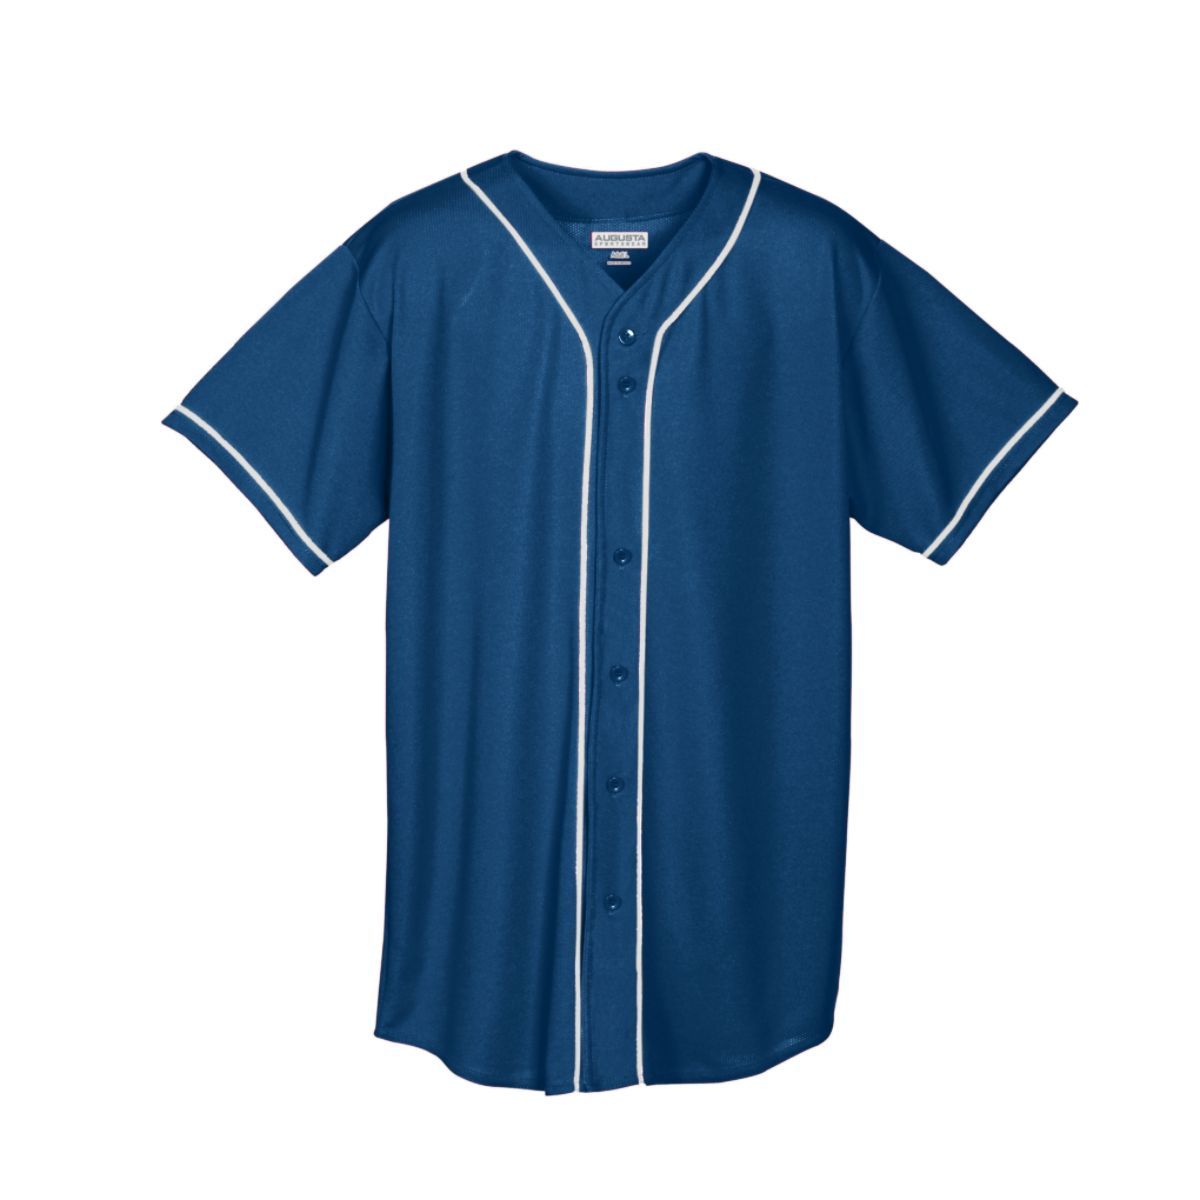 Wicking Mesh Button Front Jersey With Braid Trim - 593